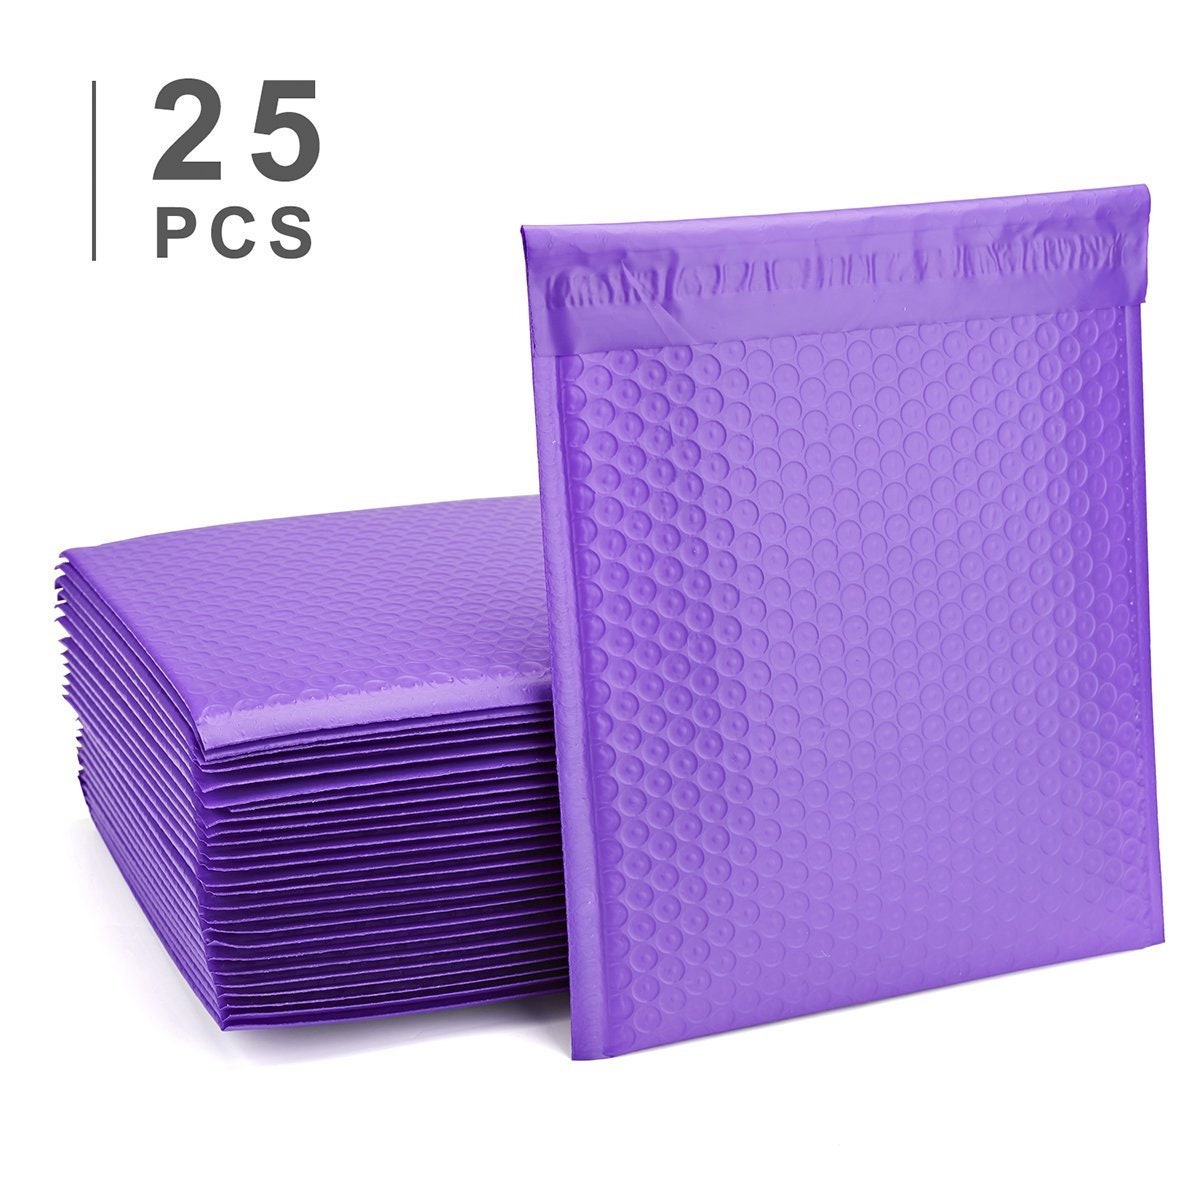 SuperPackage® 25 #2  8.5 X 12 Poly Bubble Mailers Padded Envelopes 25PM#2 